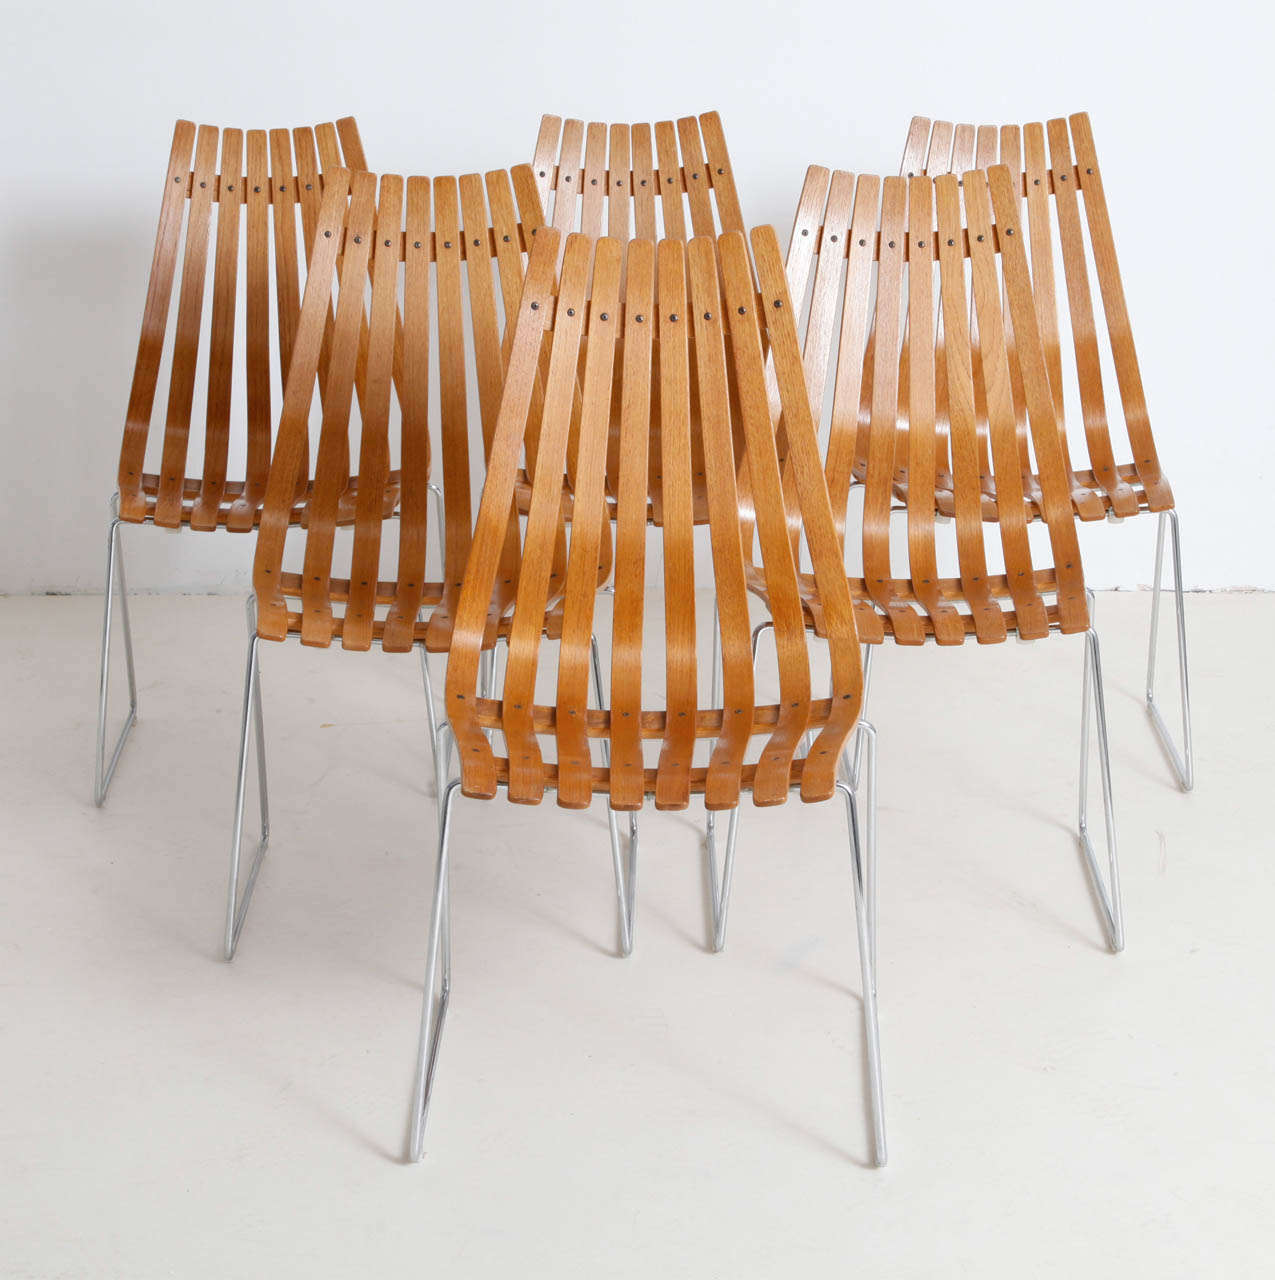 6 chairs designed by Hans Brattrud made by Hove, Norway, 1970s.
Very nice blond Teck, perfect condition.